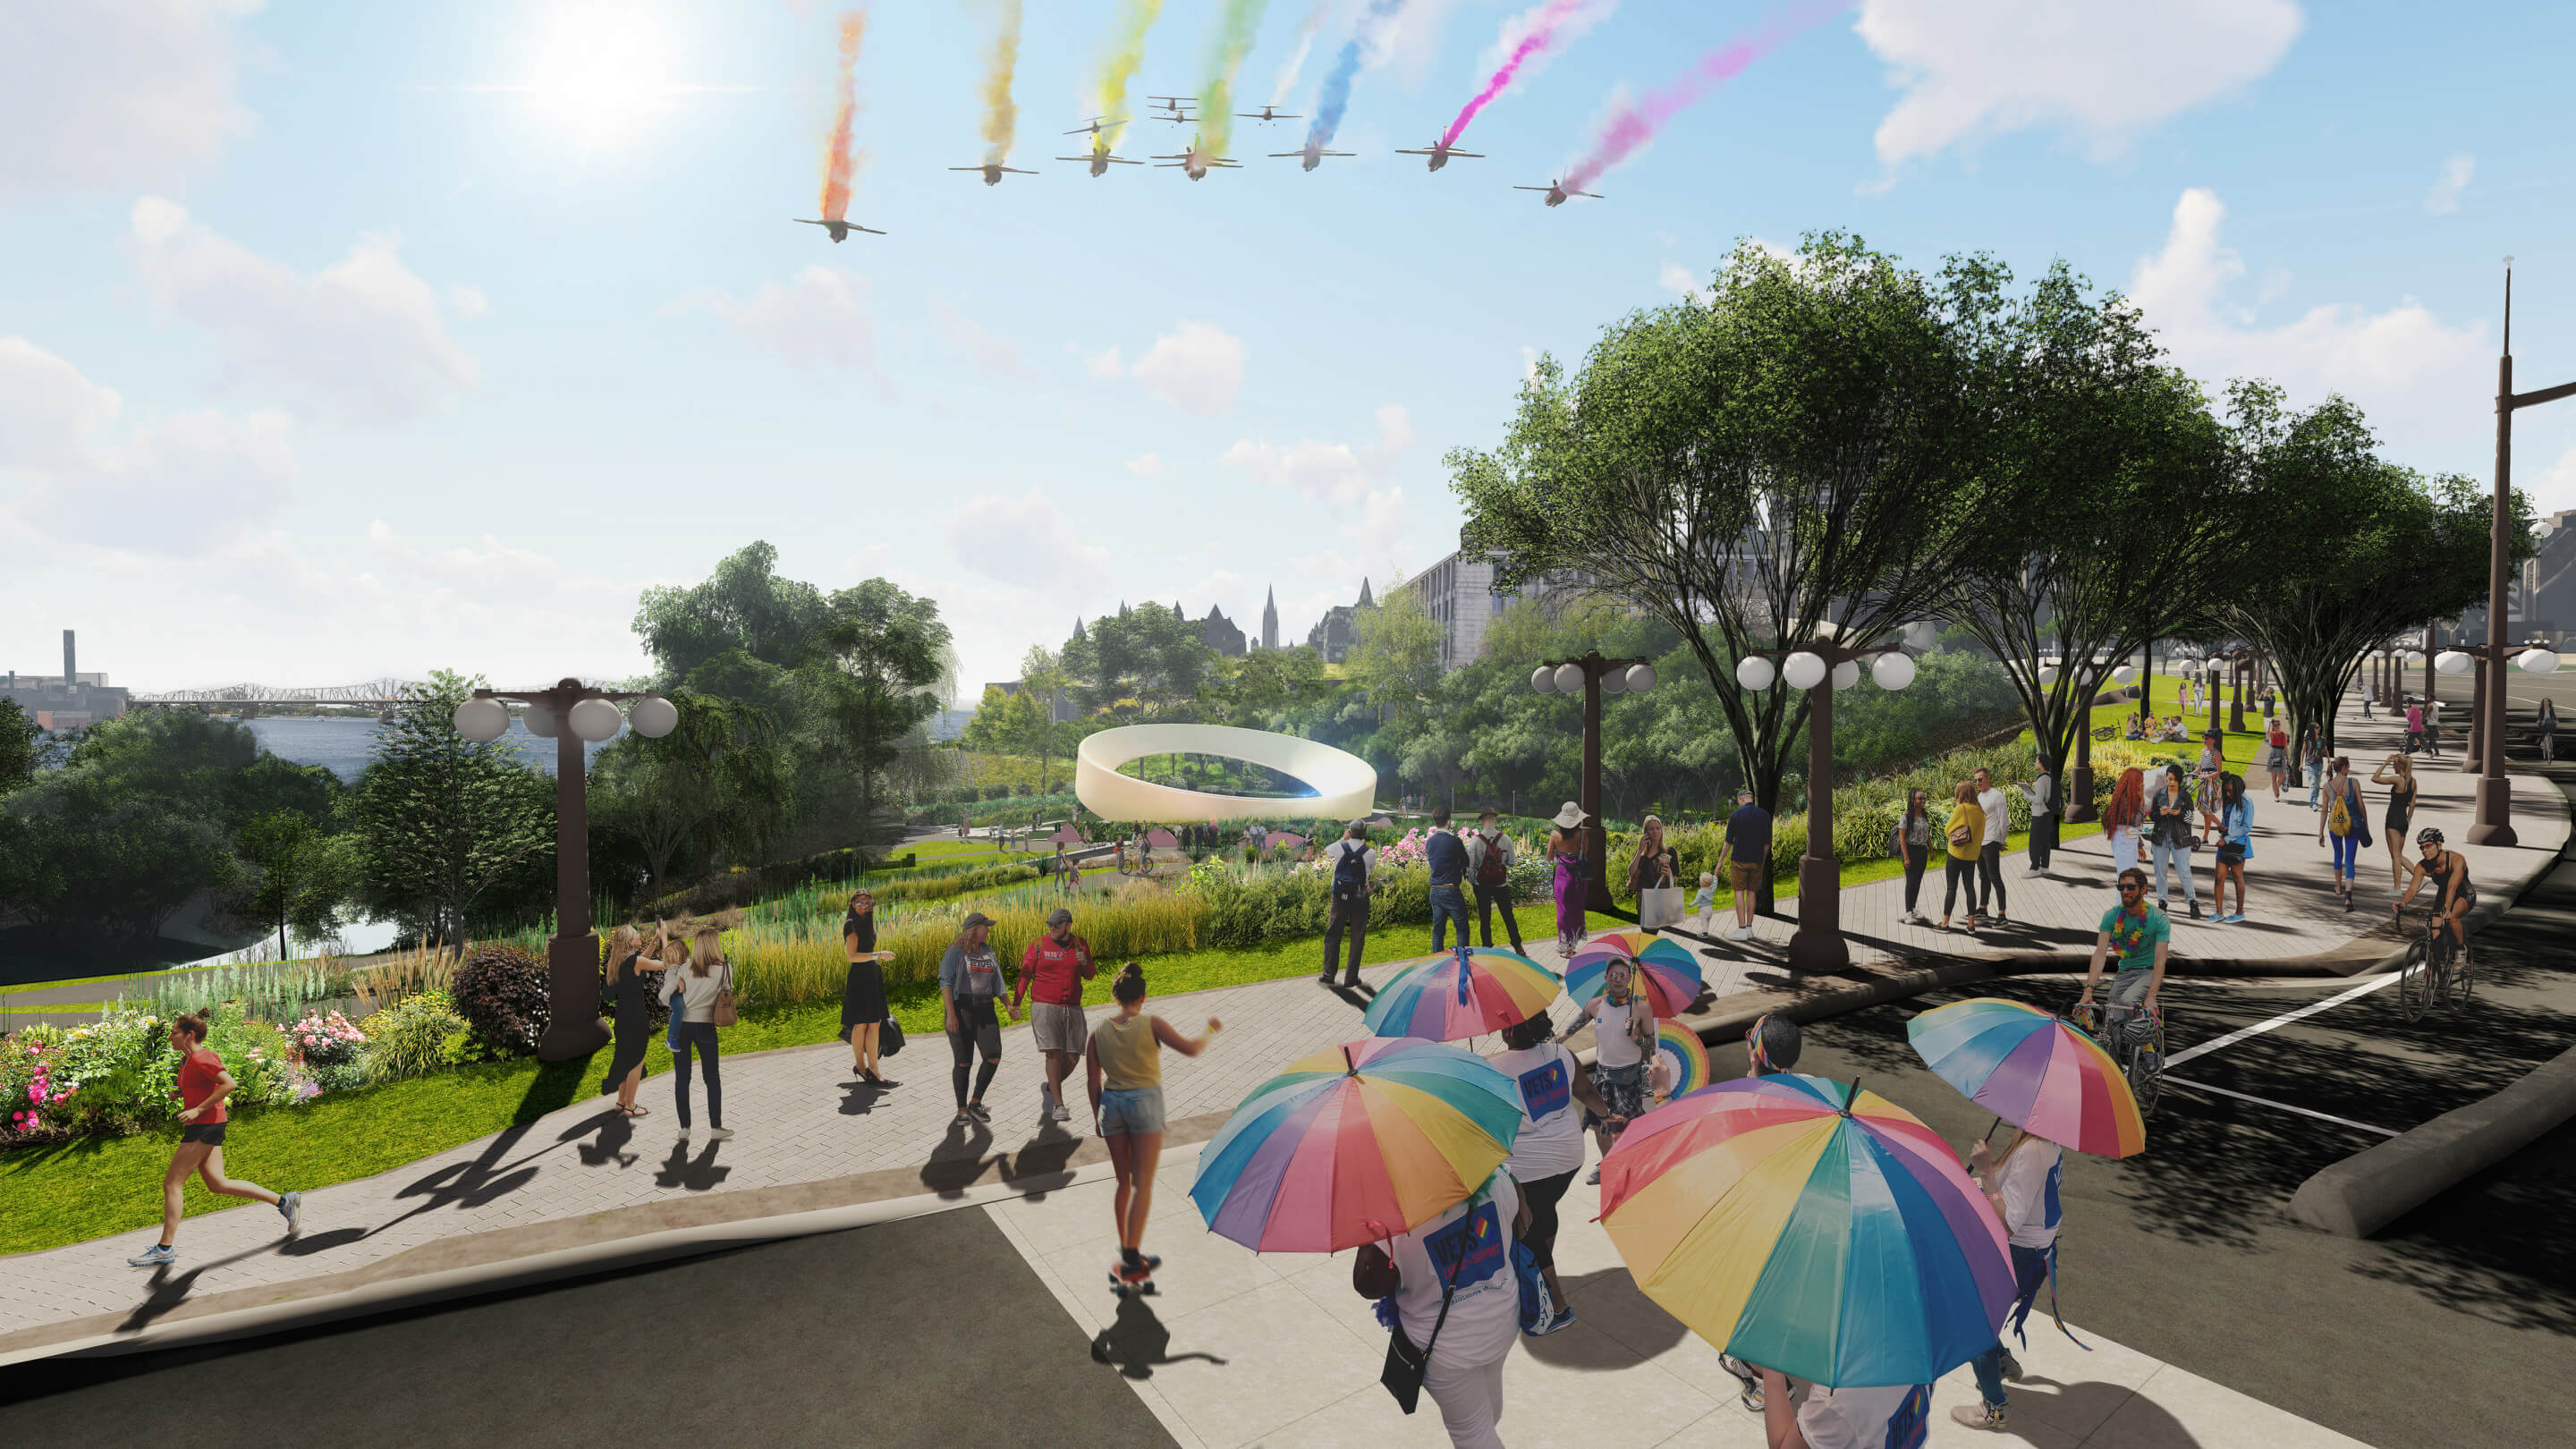 rendering of people with rainbow umbrellas at a lgbtq monument/green space